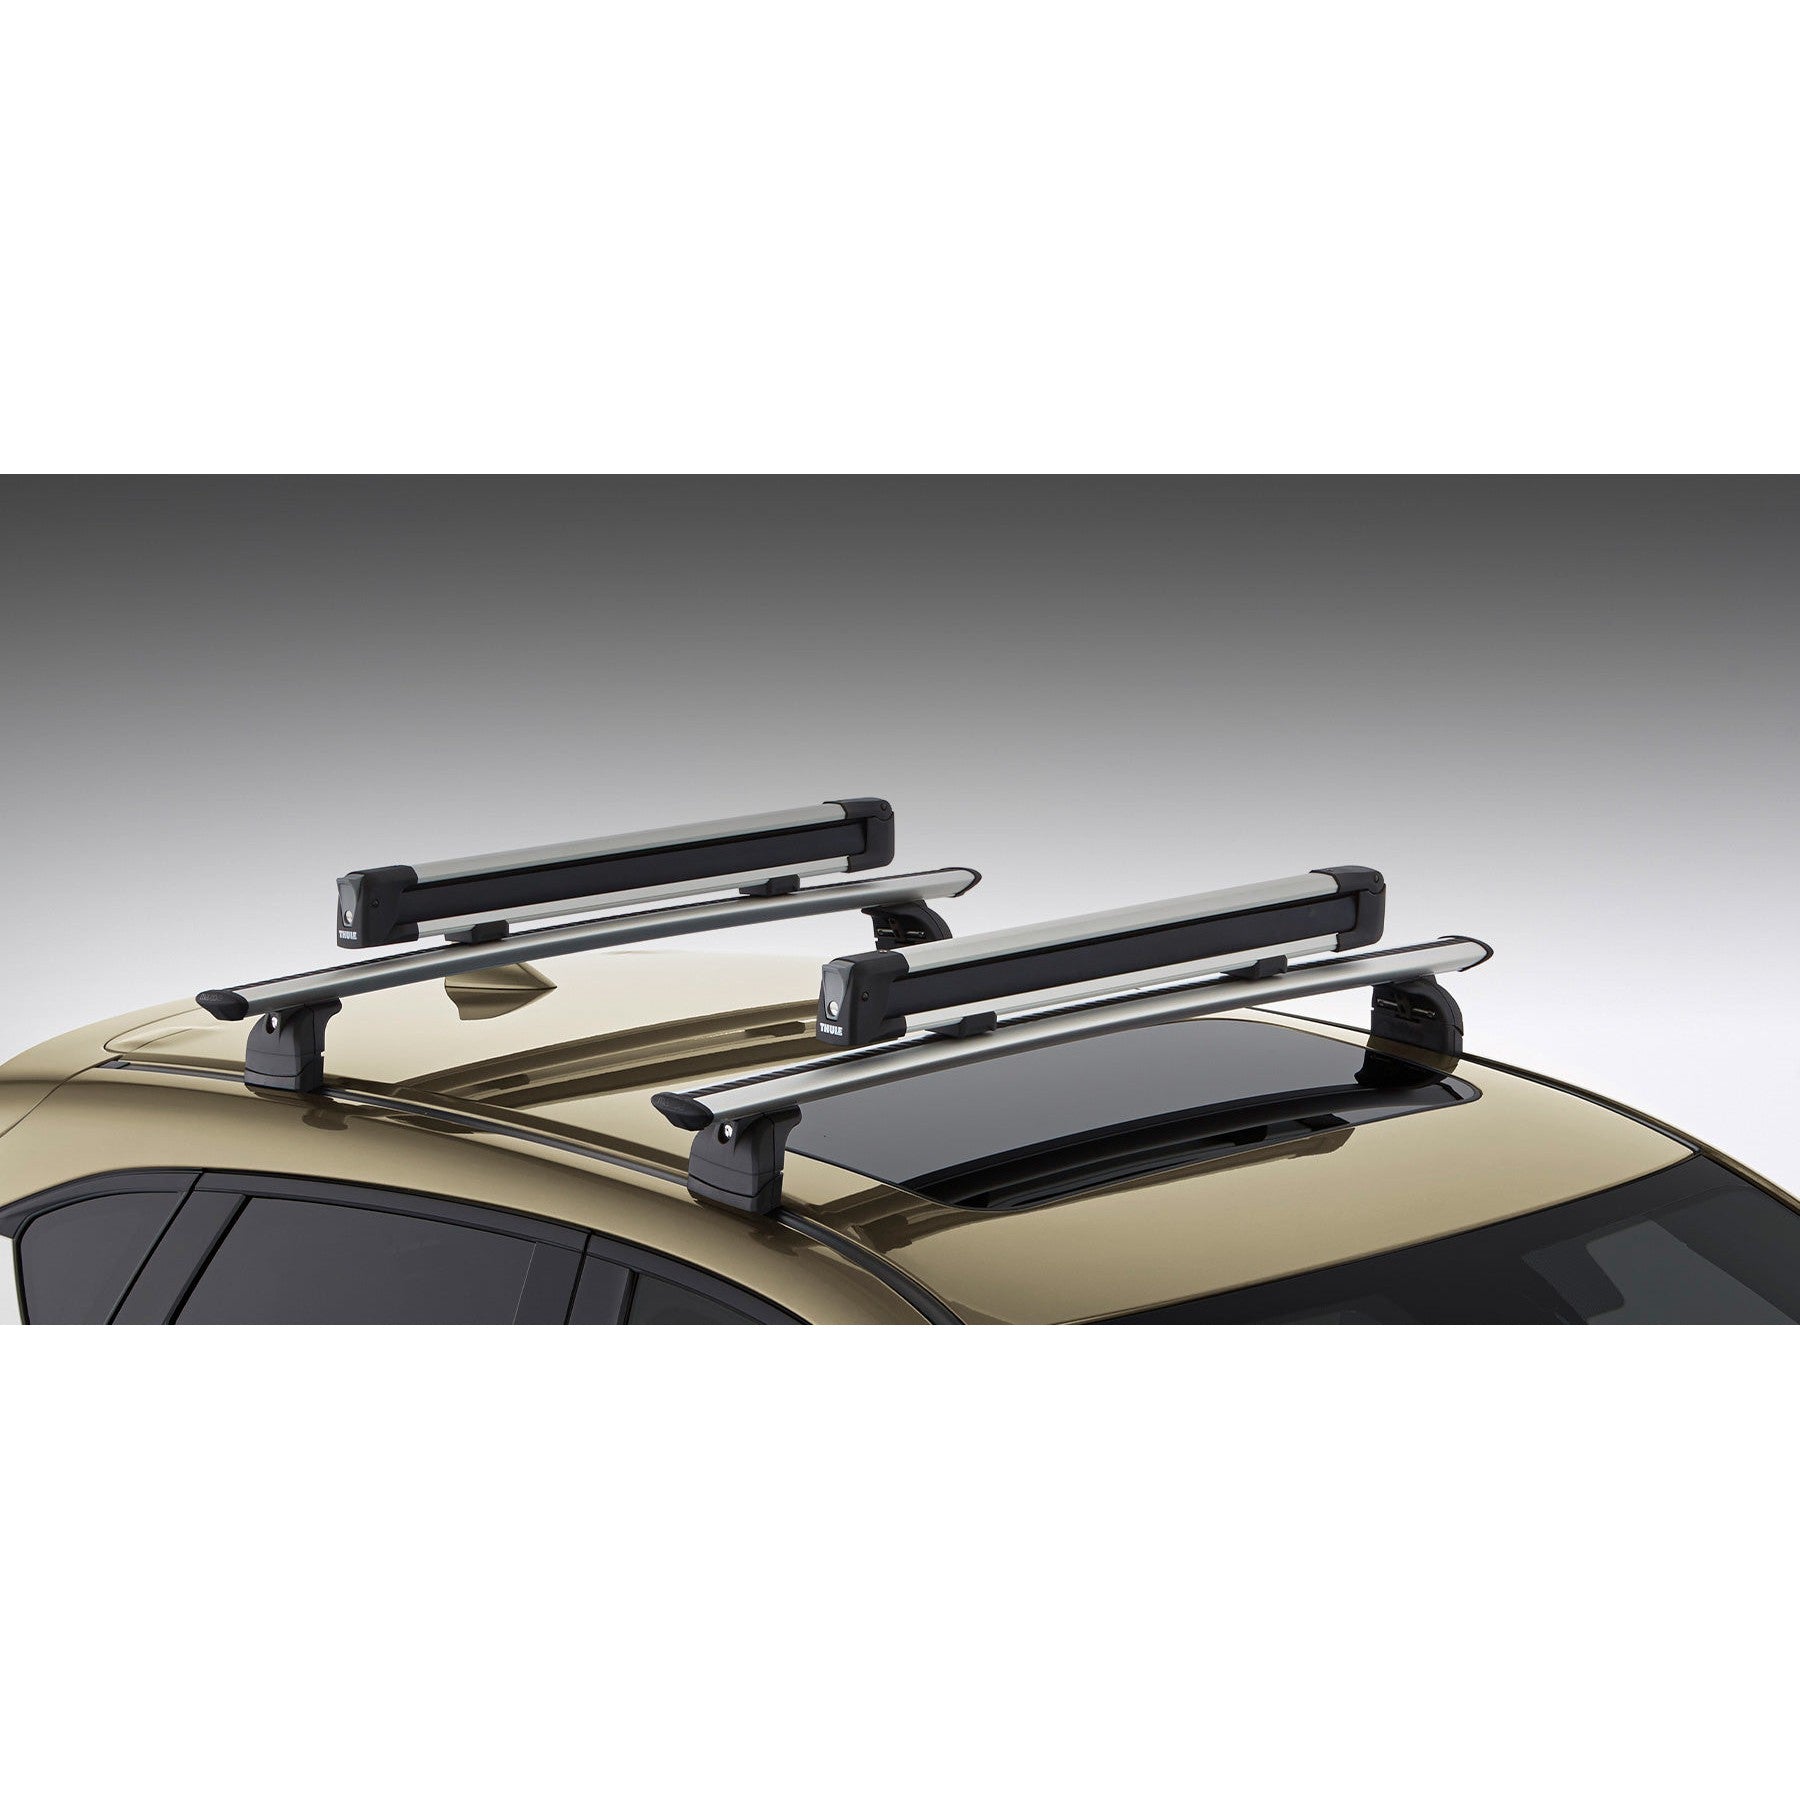 Roof Rack Accessory: Ski/Snowboard Carrier | Thule SnowPack L (732615) -  Mazda Shop | Genuine Mazda Parts and Accessories Online